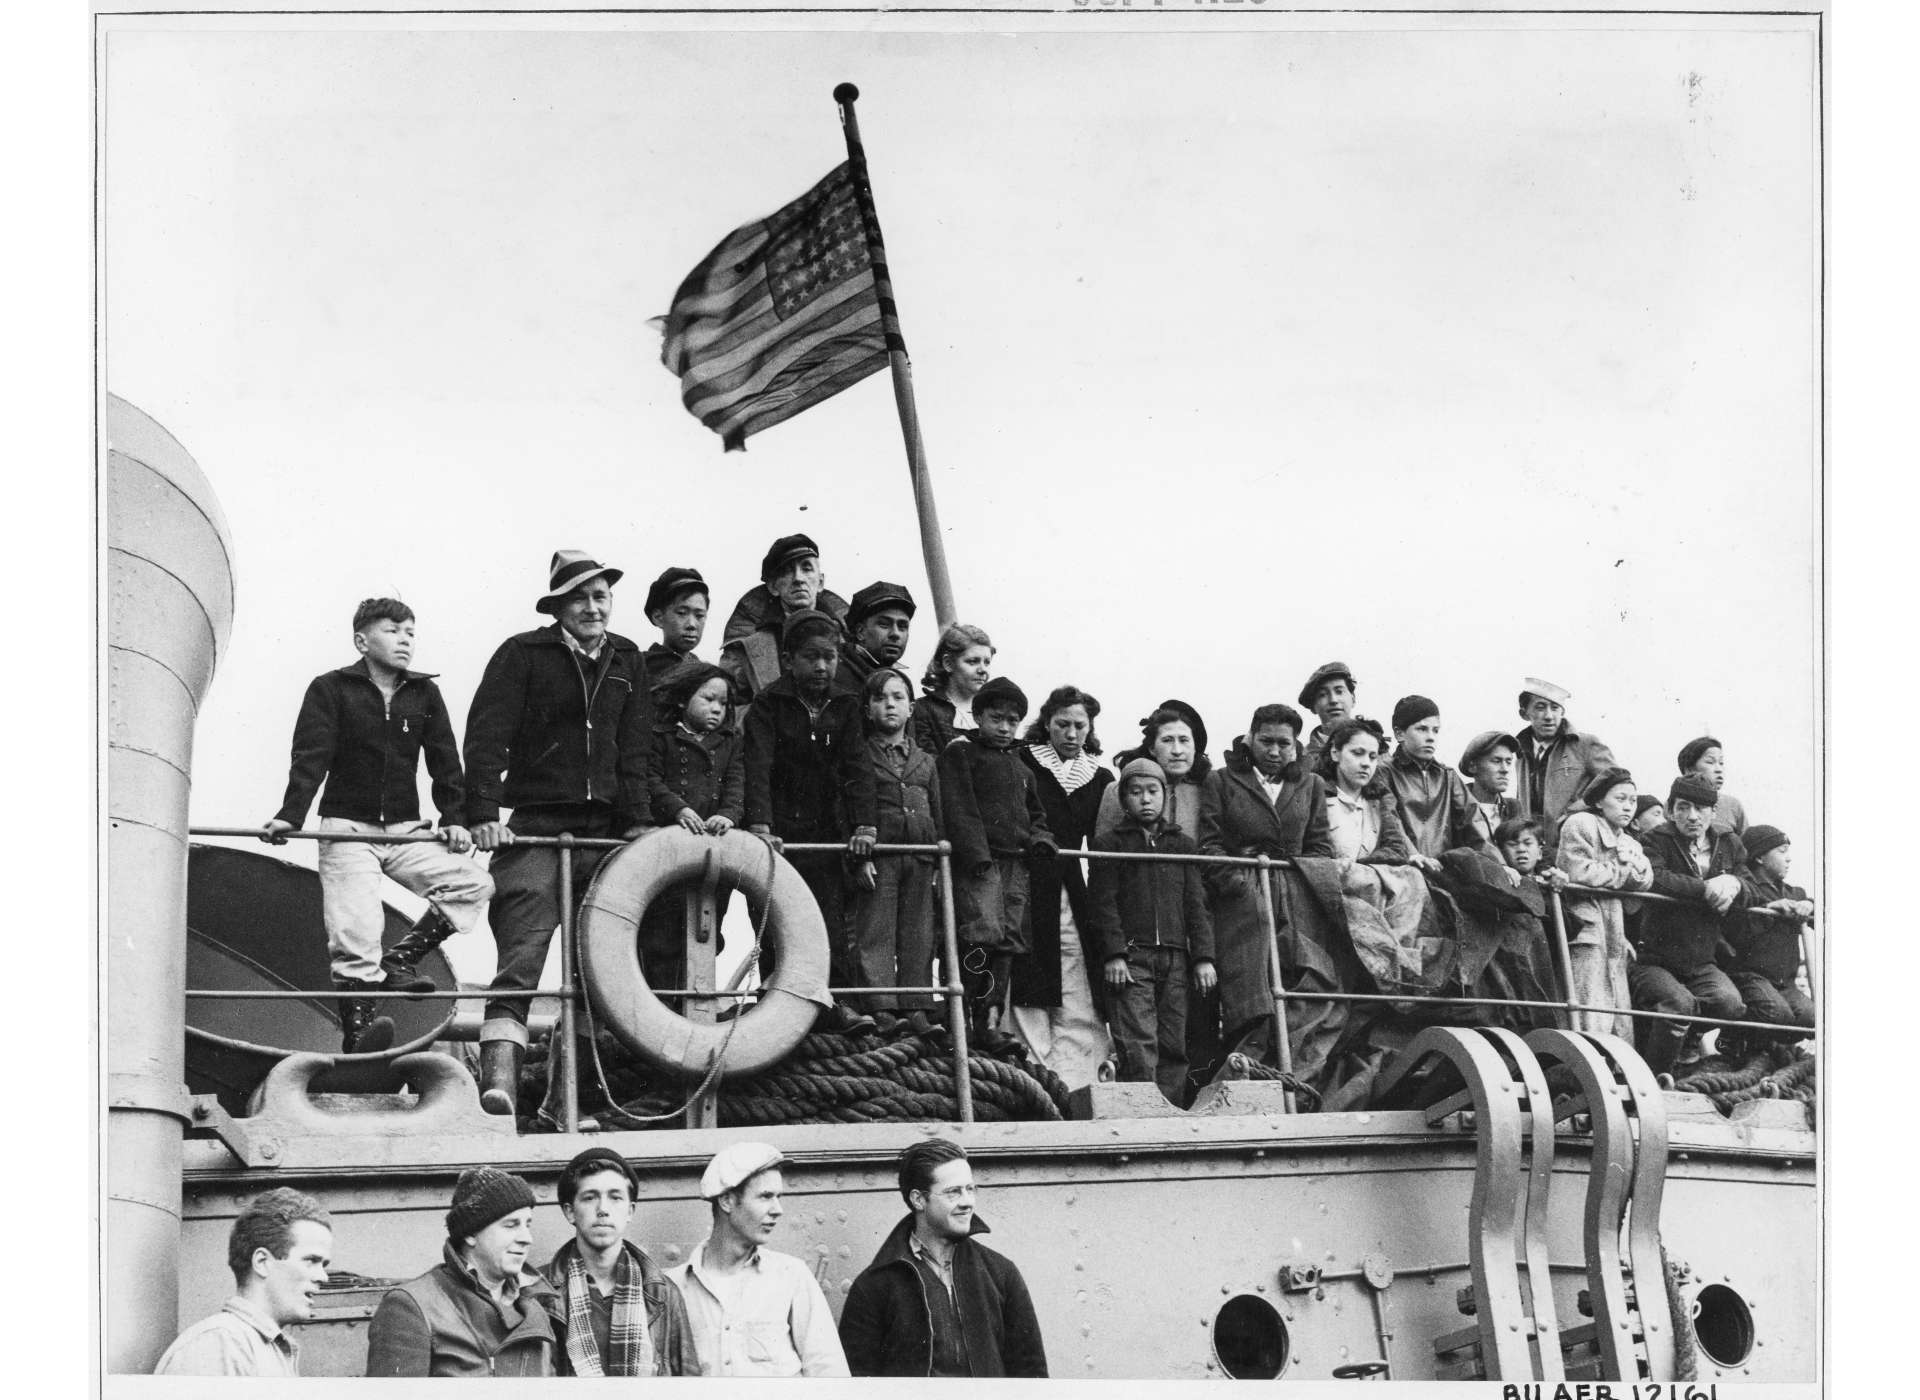 Unangan evacuees aboard the Delarof, June 1942. Courtesy of the National Archives and Records Administration.